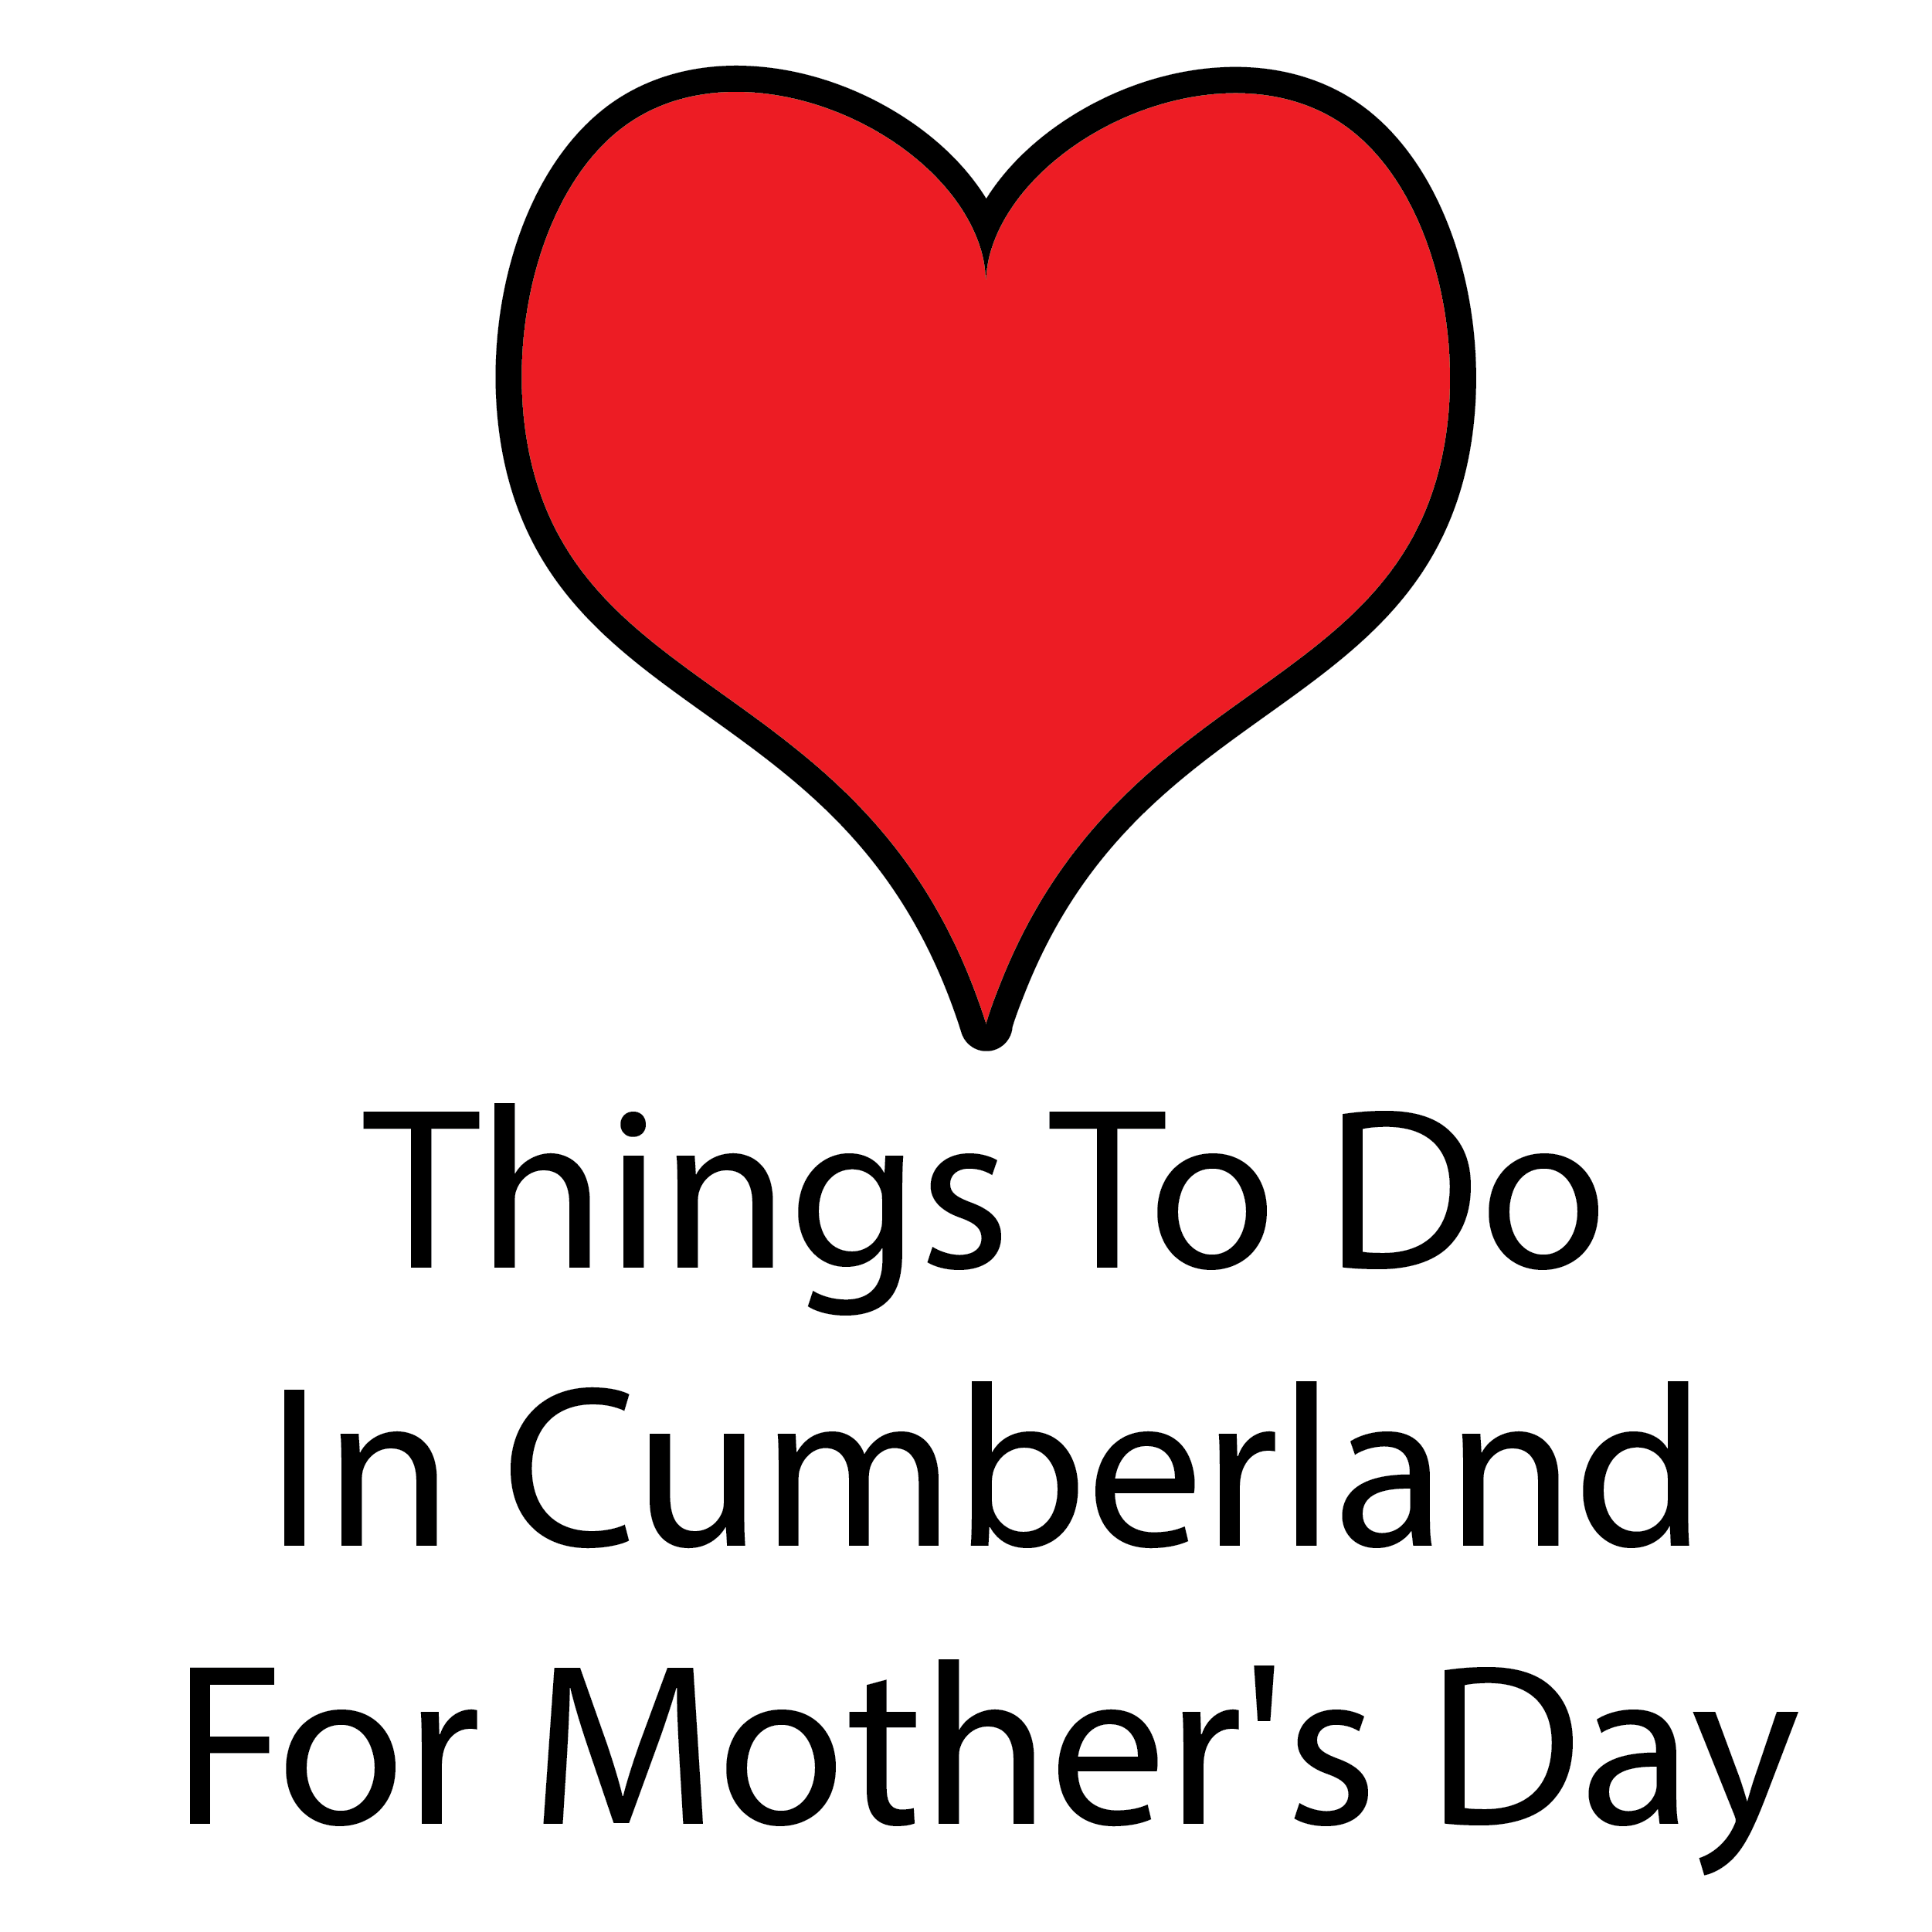 Things To Do In Cumberland For Mother’s Day